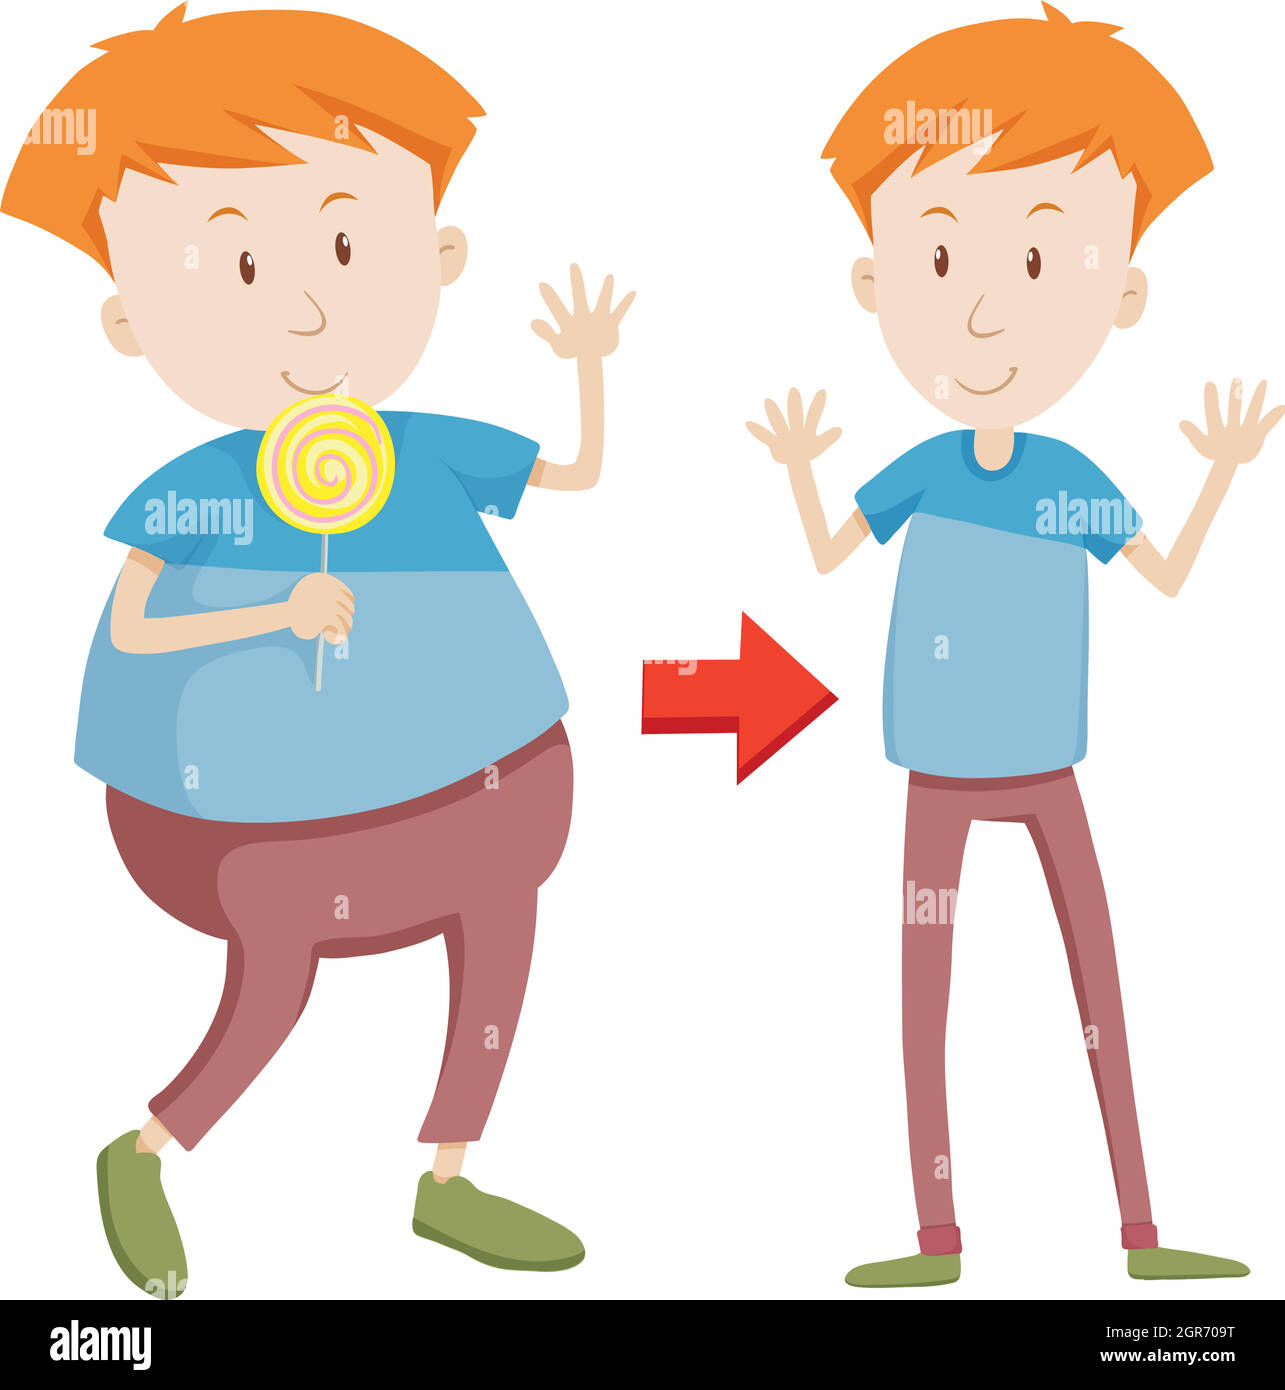 A Cartoon of Fat and Slim Boy Stock Vector